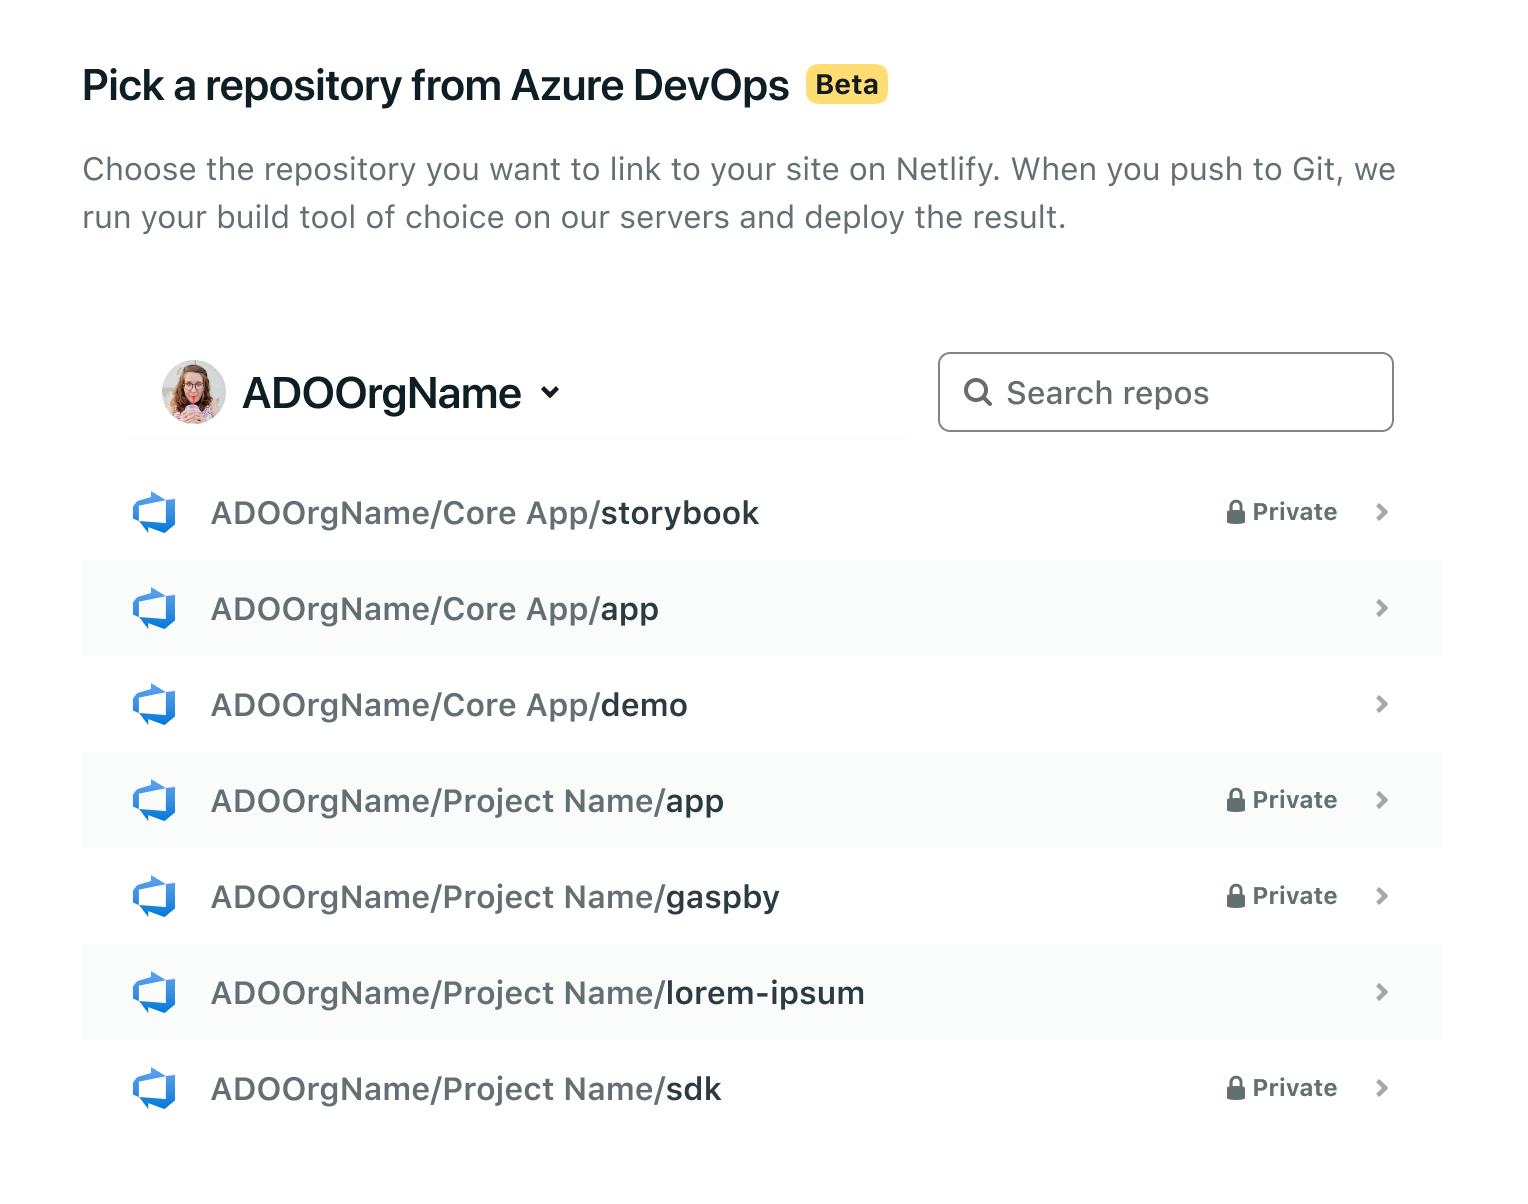 Pick a repository from Azure DevOps. Netlify shows all of the repos authorized for linking.